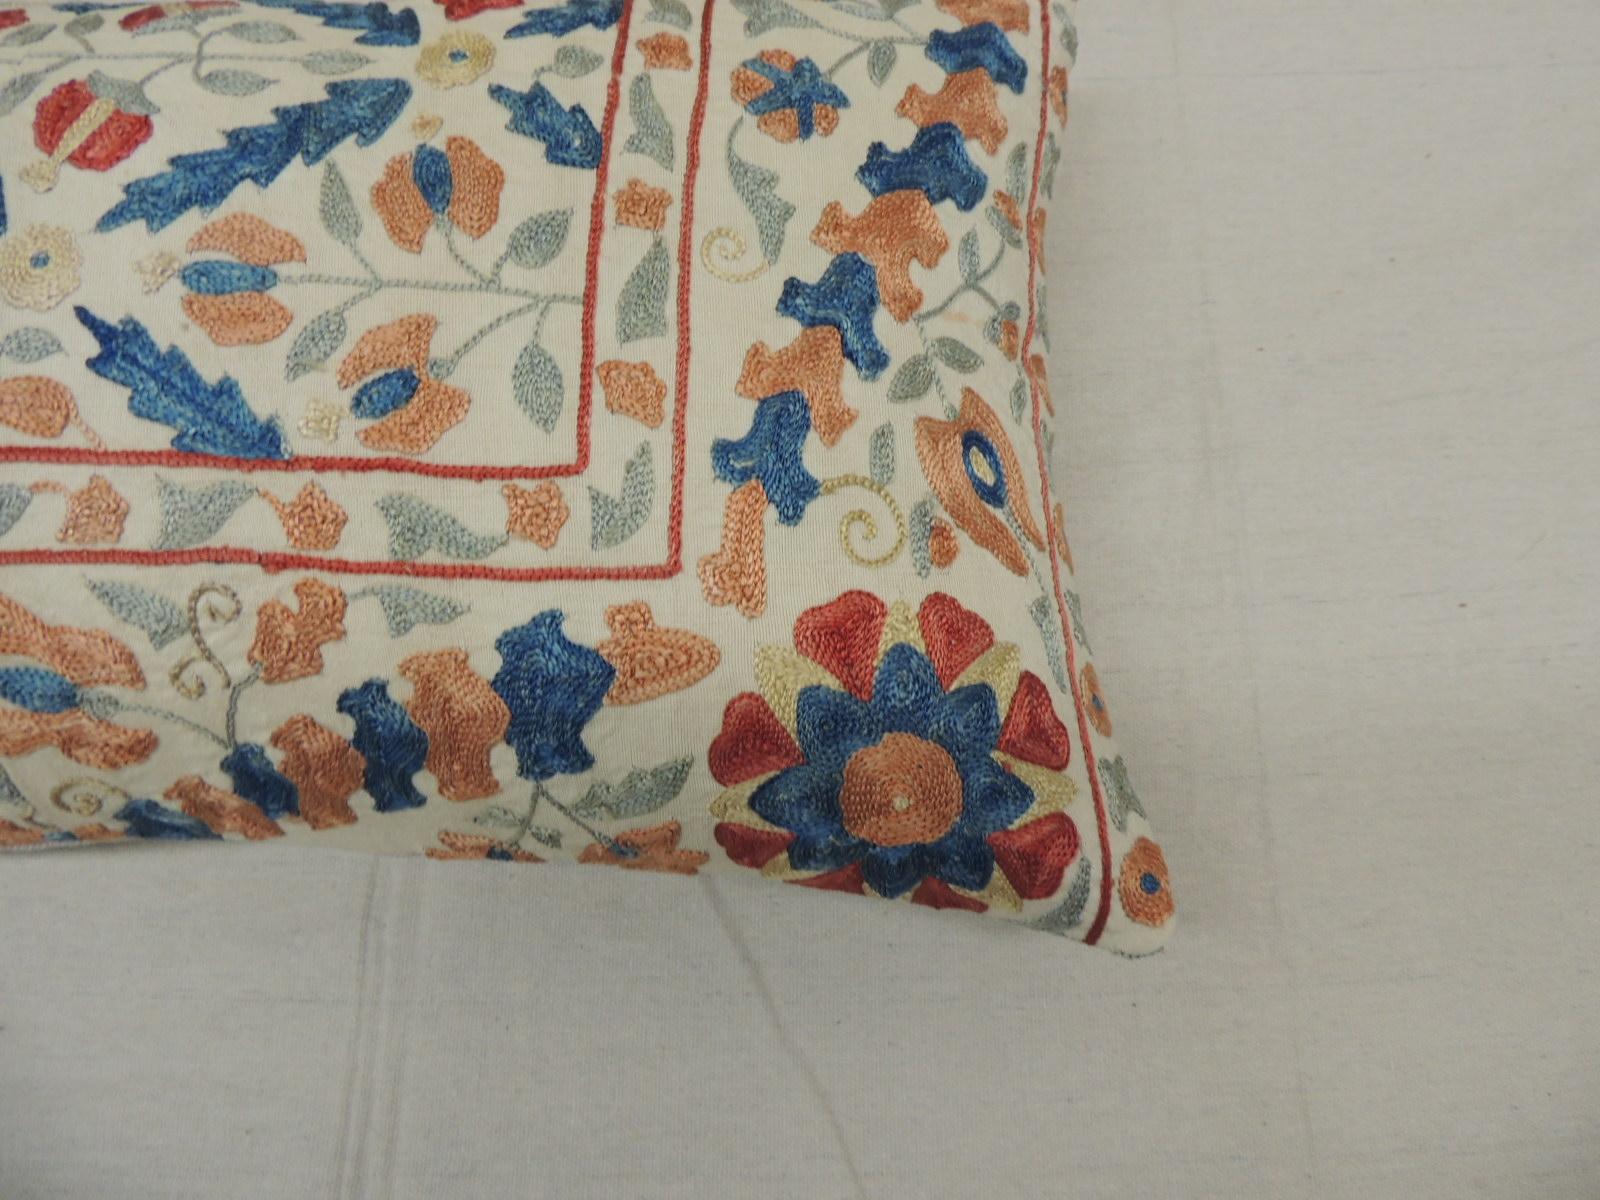 Hand-Crafted Vintage Orange and Blue Embroidered Suzani Decorative Bolster Pillow